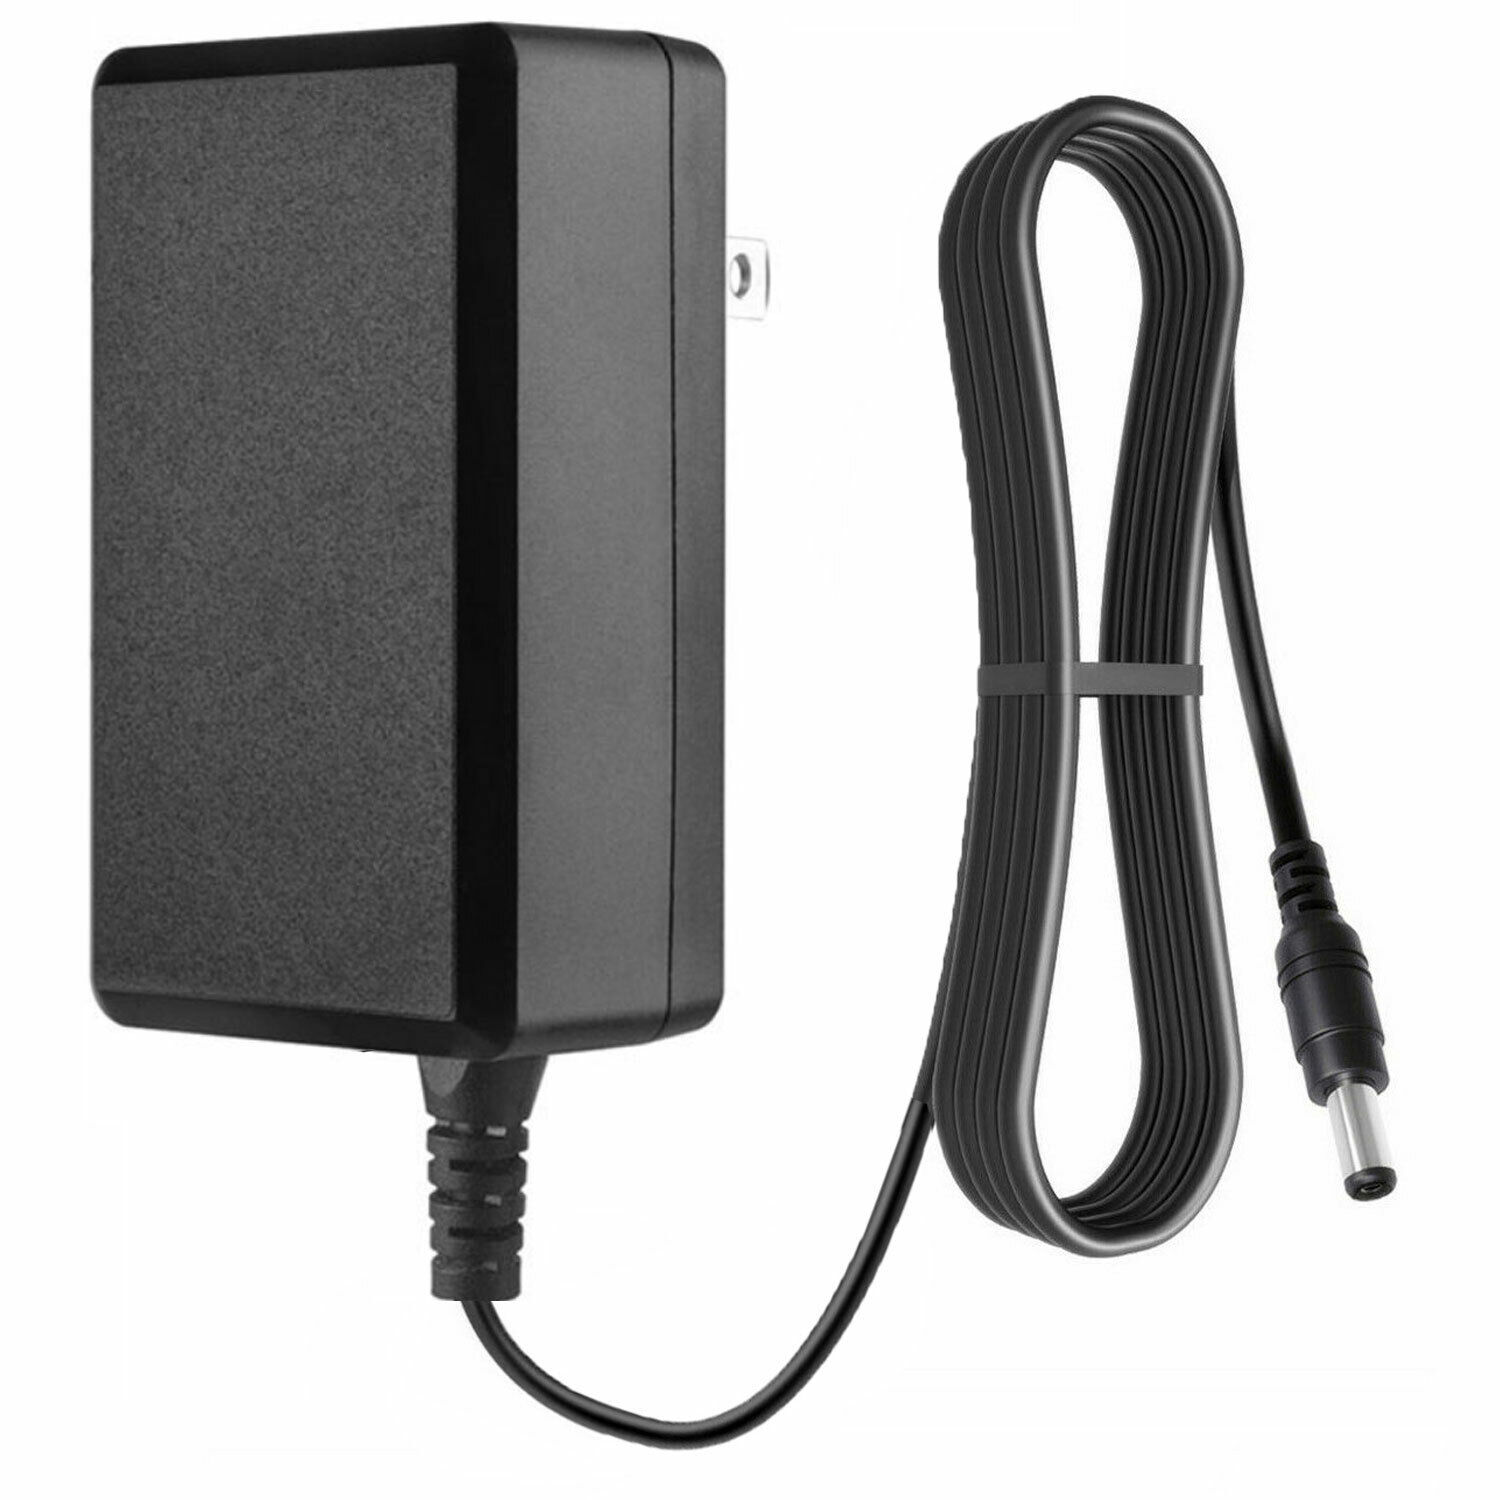 *Brand NEW*Adapter 72169 Andis Slimline Pro Li Trimmer AC Adapter Power Supply Charger